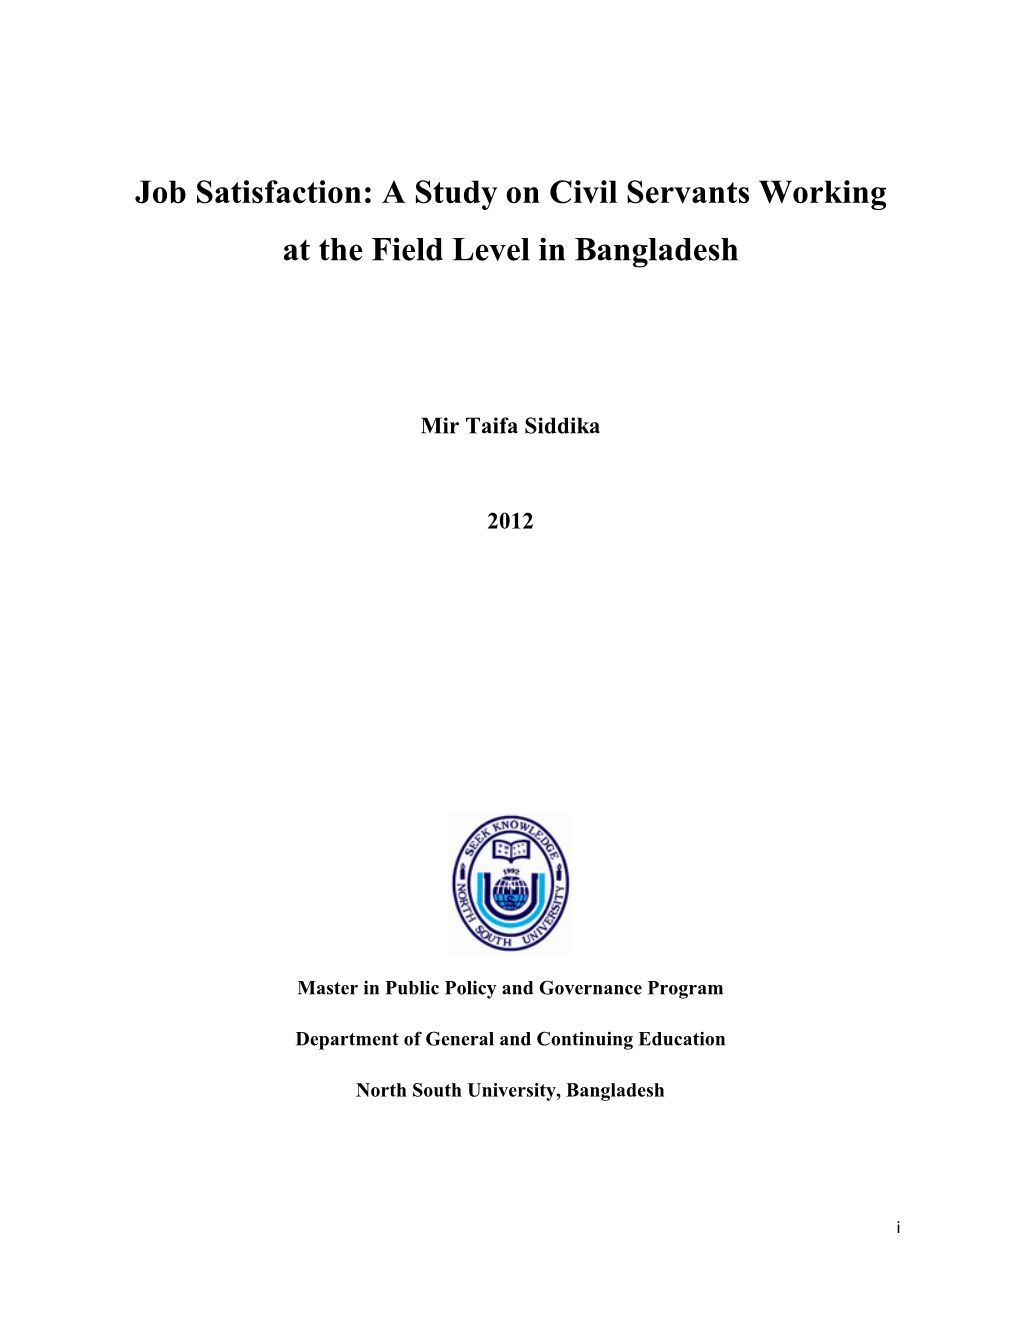 A Study on Civil Servants Working at the Field Level in Bangladesh